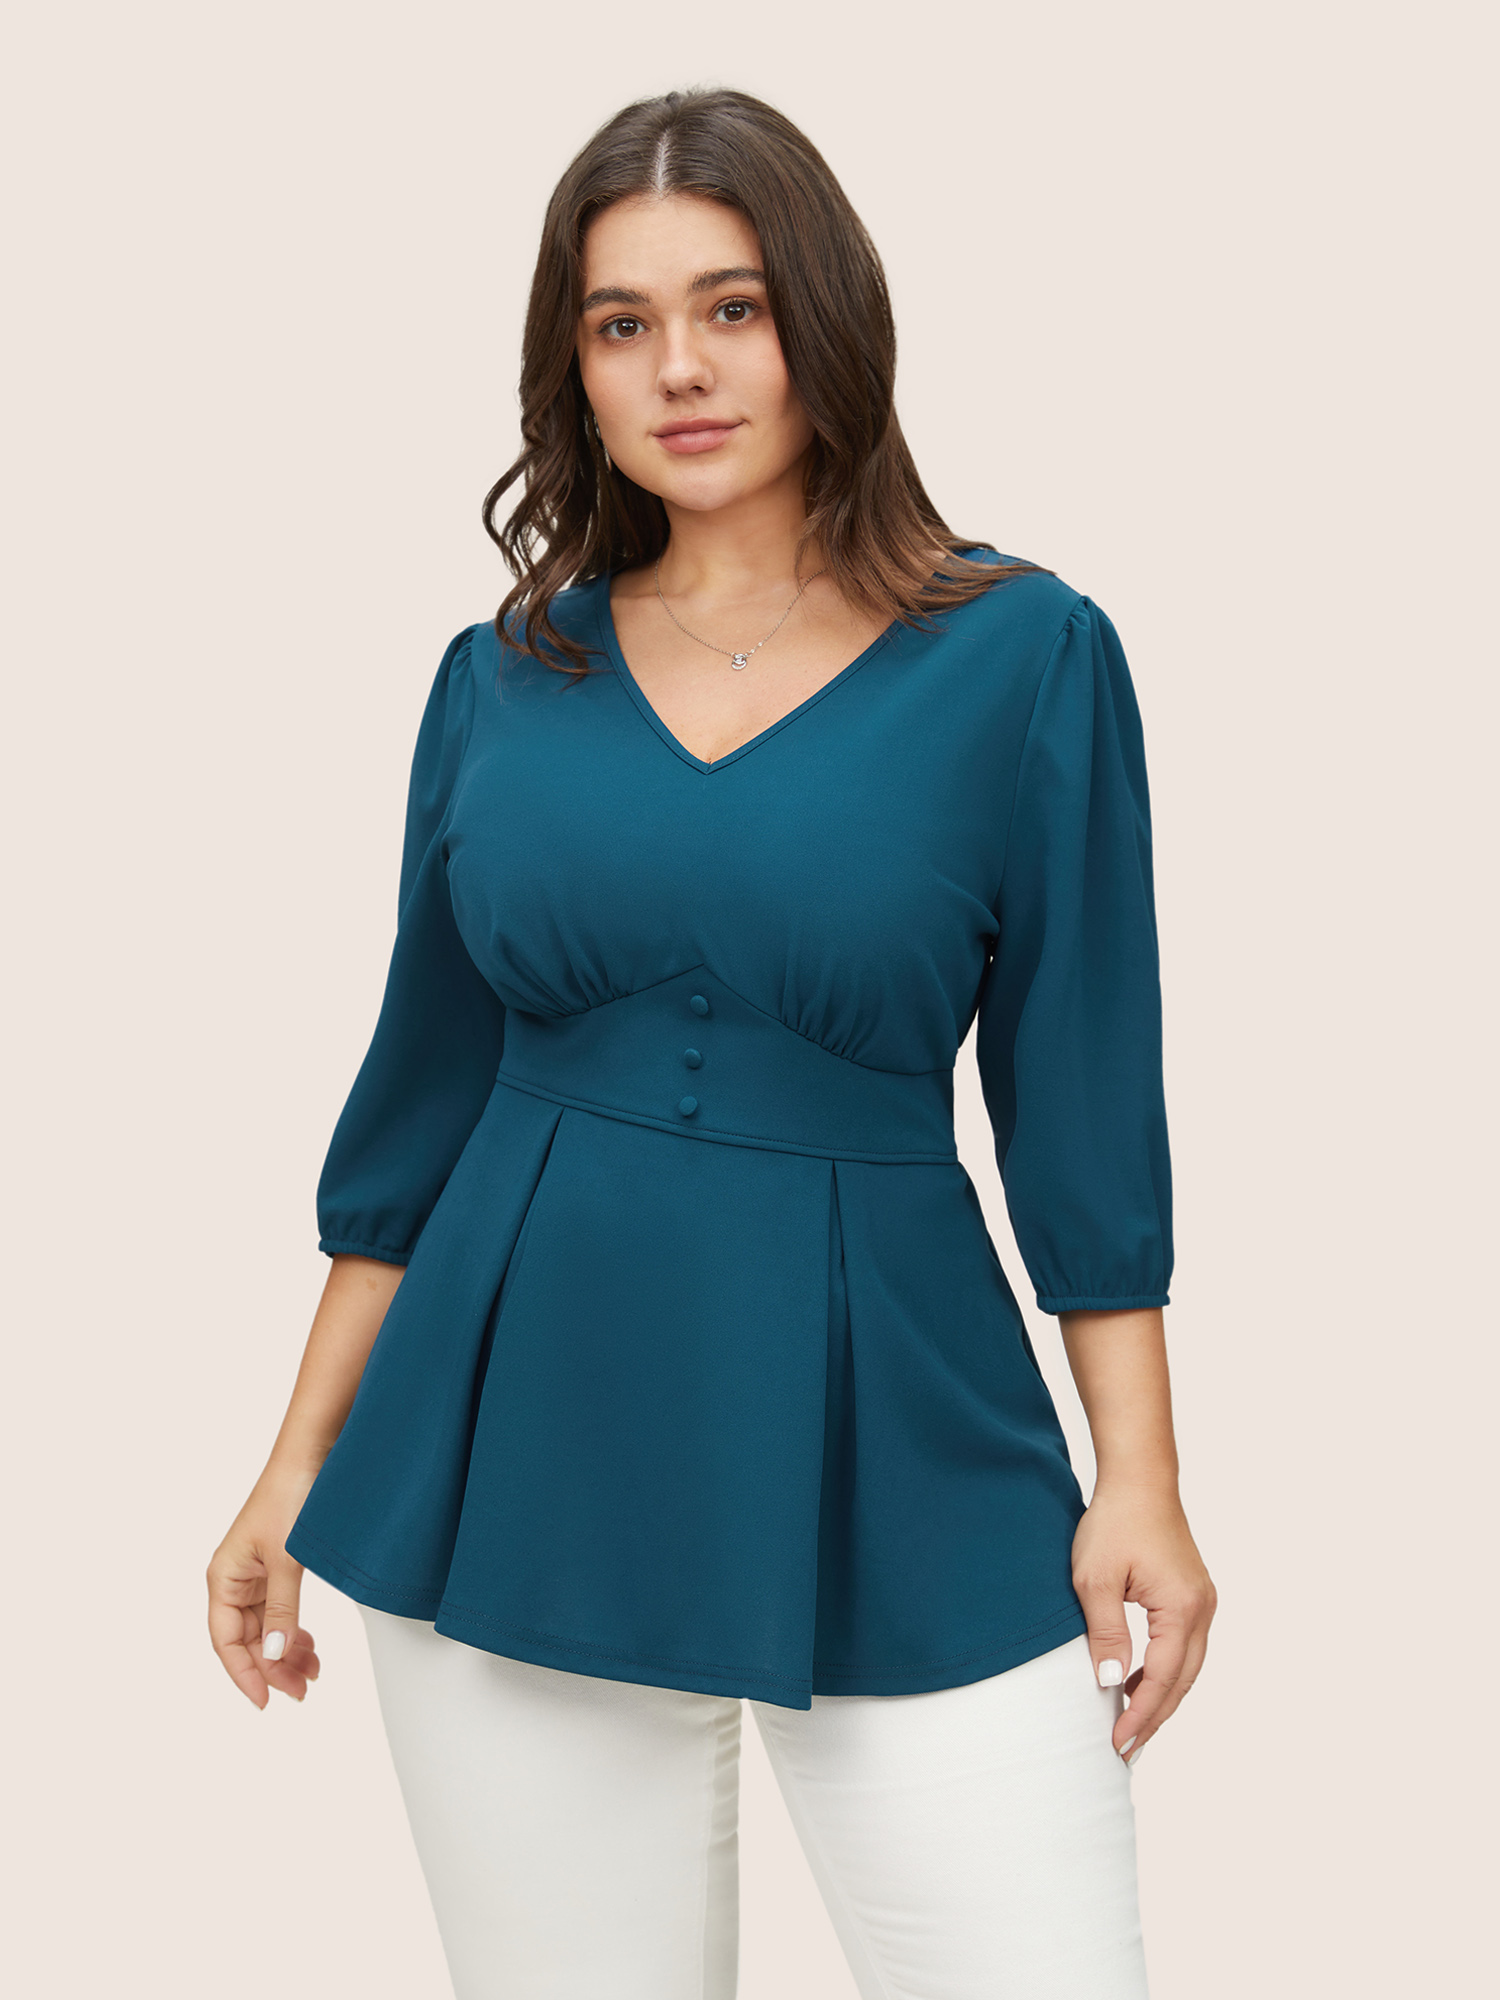 

Plus Size Aegean Plain Plicated Detail Button Detail Blouse Women At the Office Elbow-length sleeve V-neck Work Blouses BloomChic